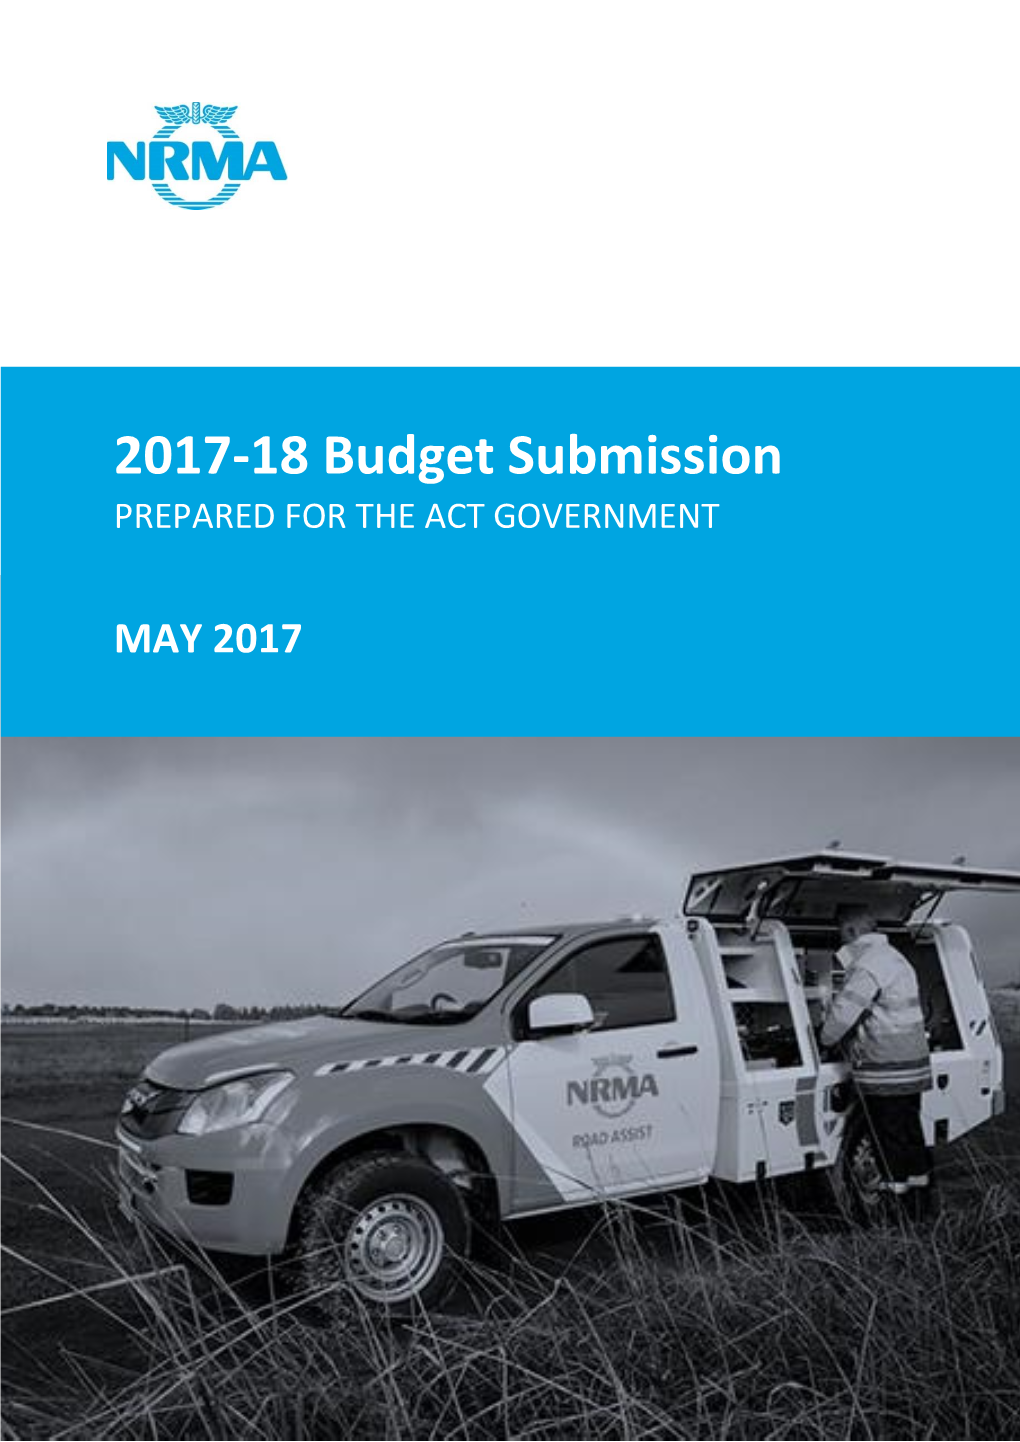 2017-18 Budget Submission PREPARED for the ACT GOVERNMENT